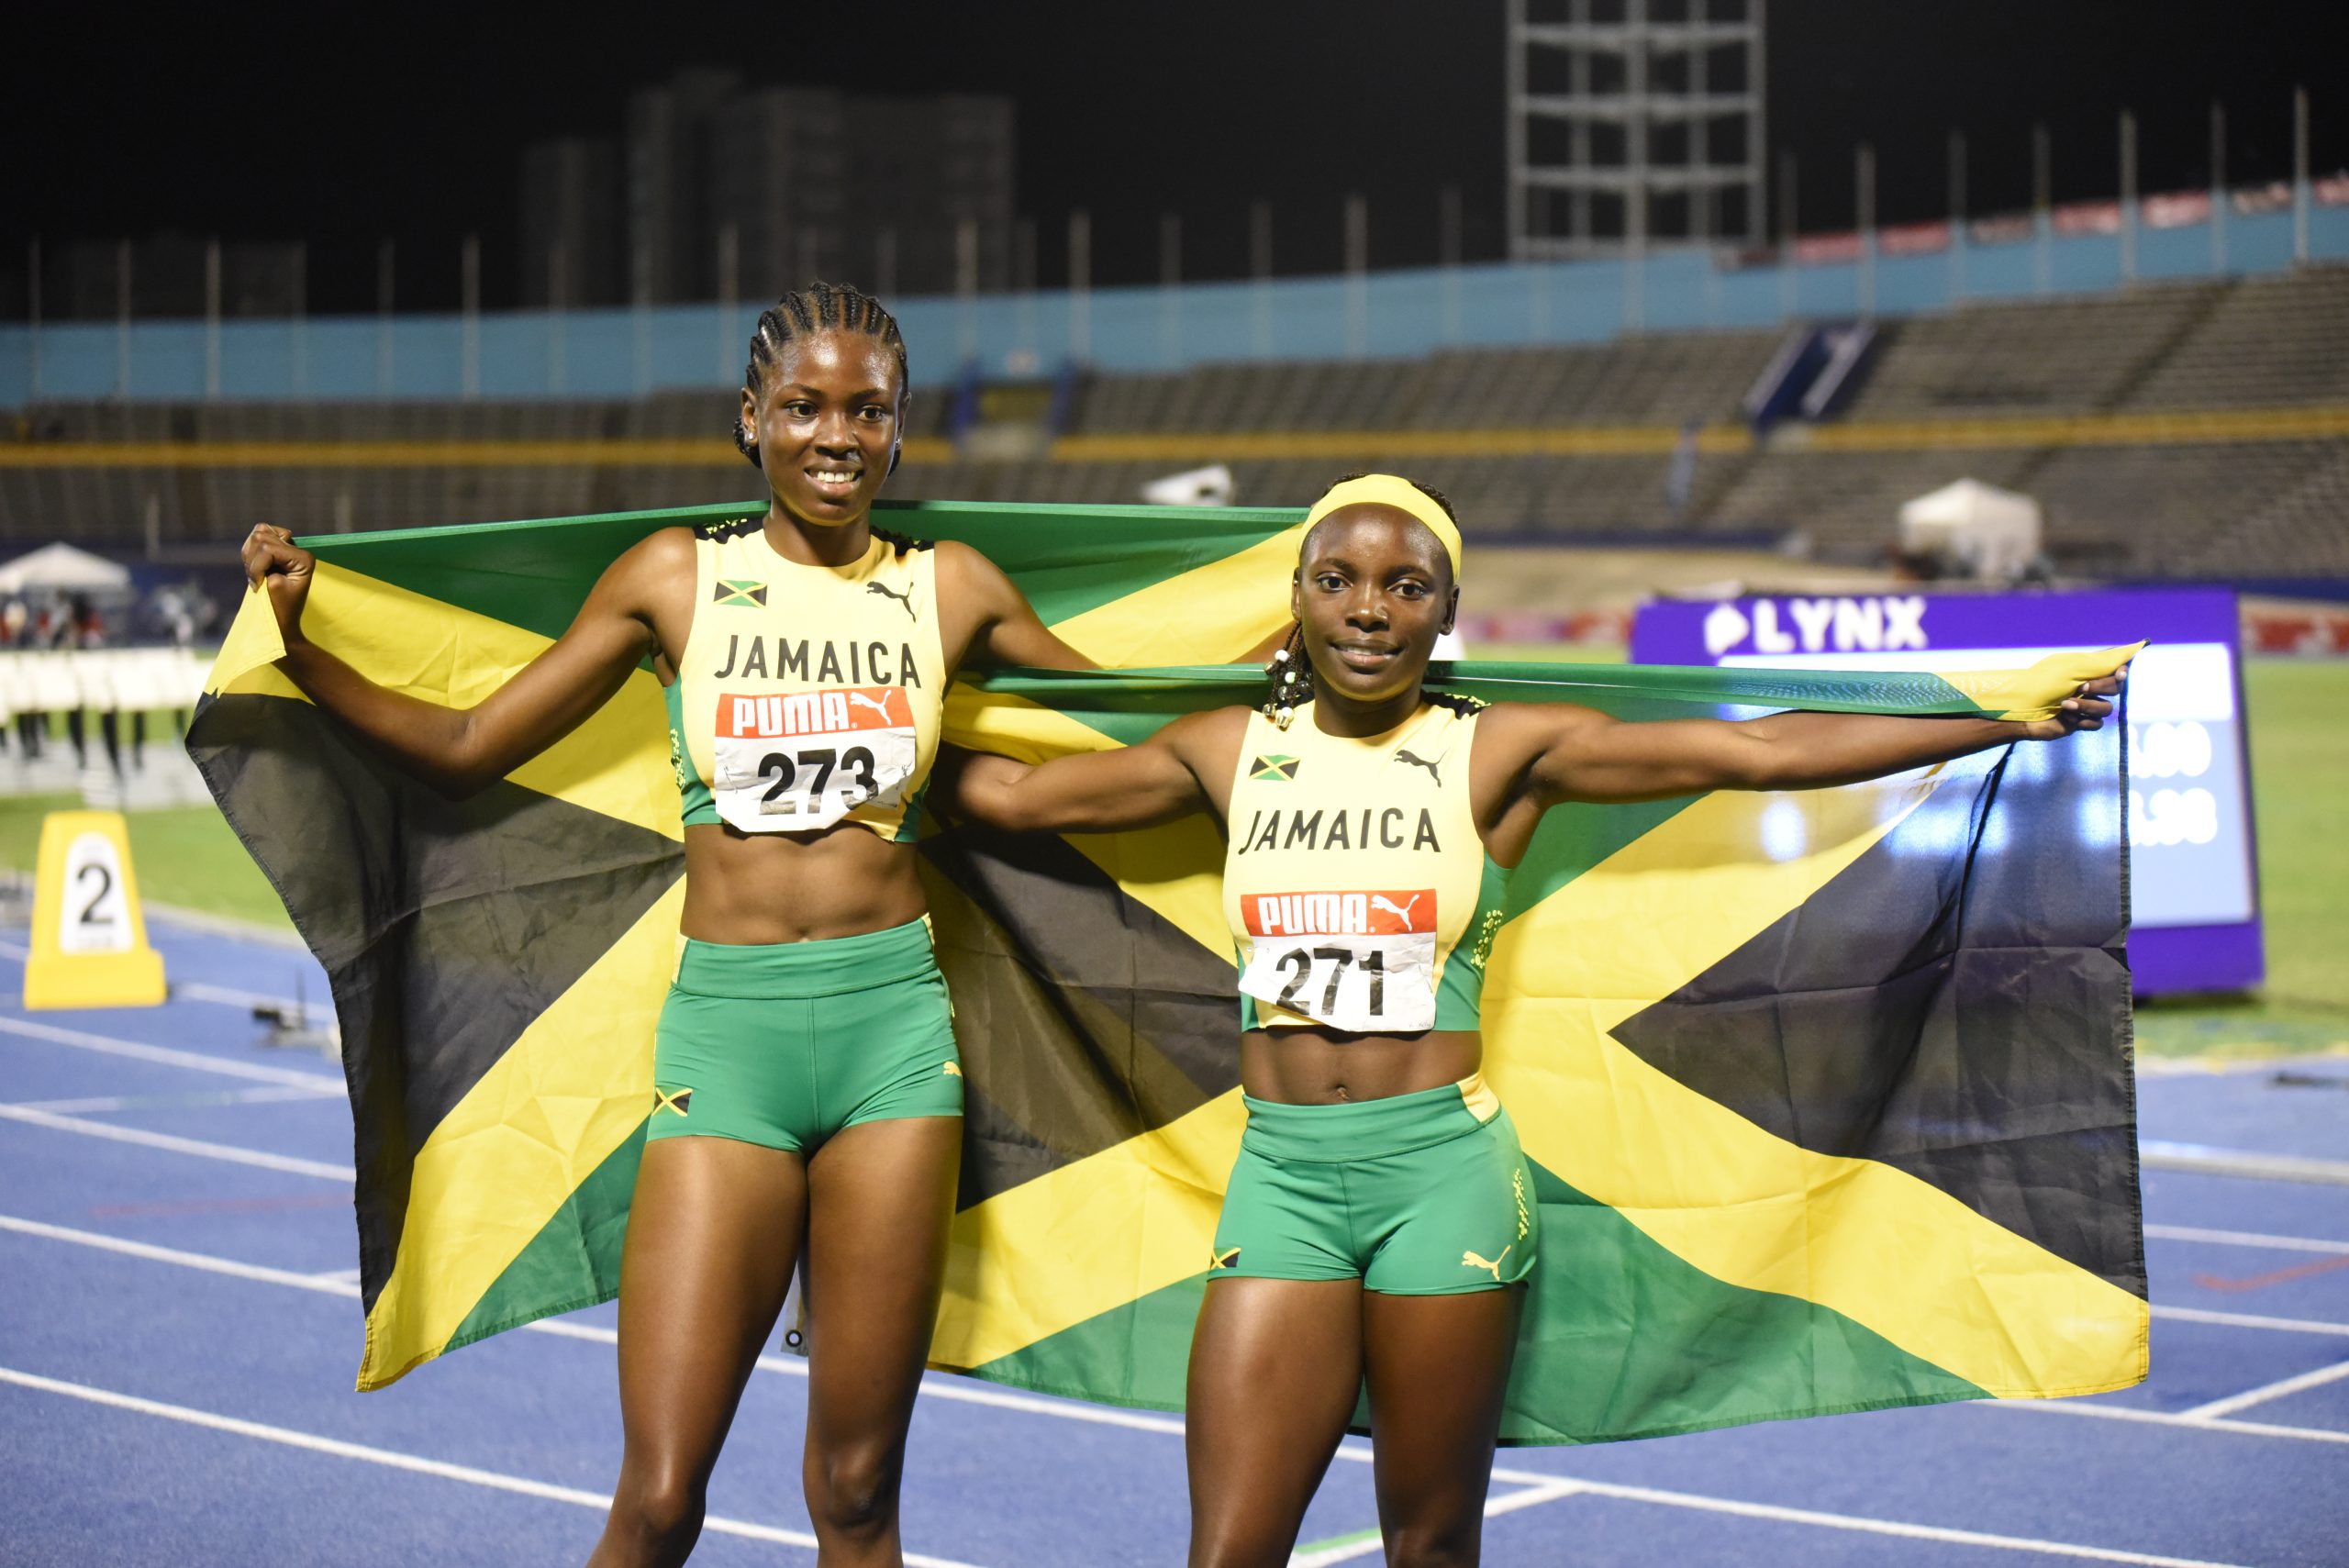 Kaylia Kelly, right, and Oneika McAnnuff, 1 and 2 in the U20 girls' 400m final at Carifta Games 2022